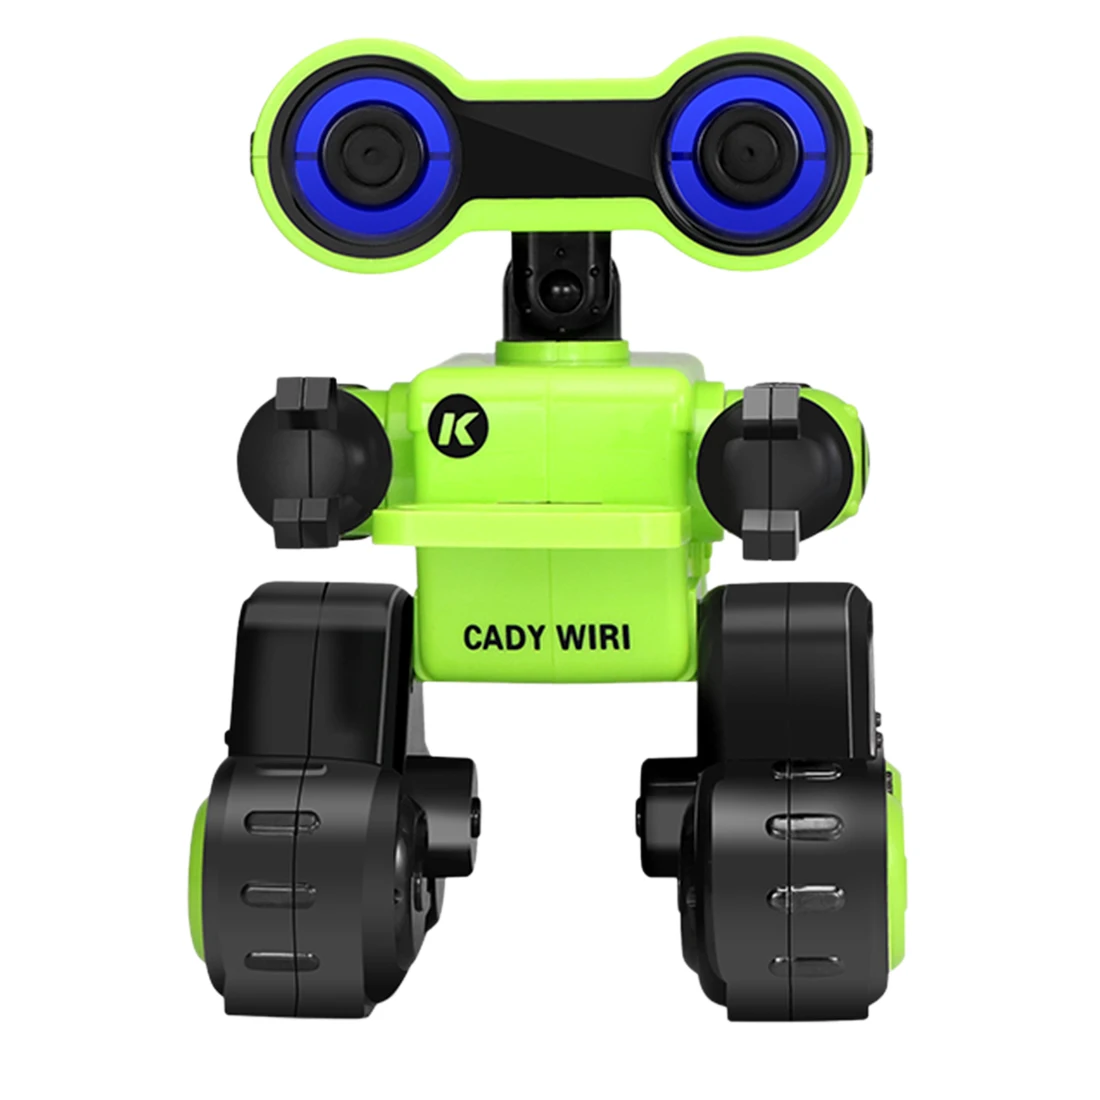 

New Arrival 1 Pcs Intelligent Programming Robot With Singing Dancing Voice Chat Light Control Functions - Green